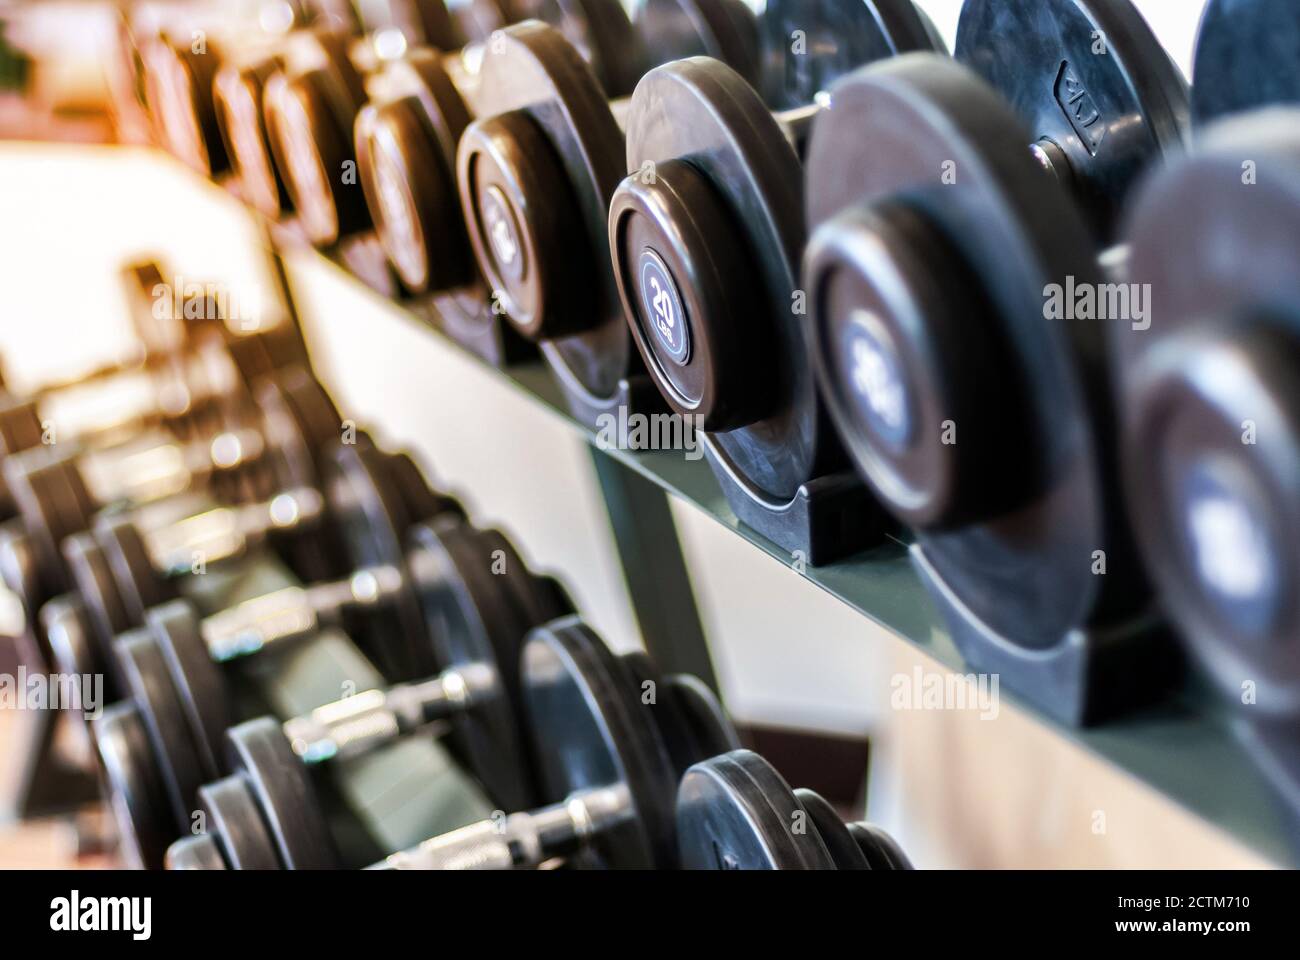 Rows of various dumbbells in the fitness. Healthy life and gym exercise equipments and sports concept. Stock Photo